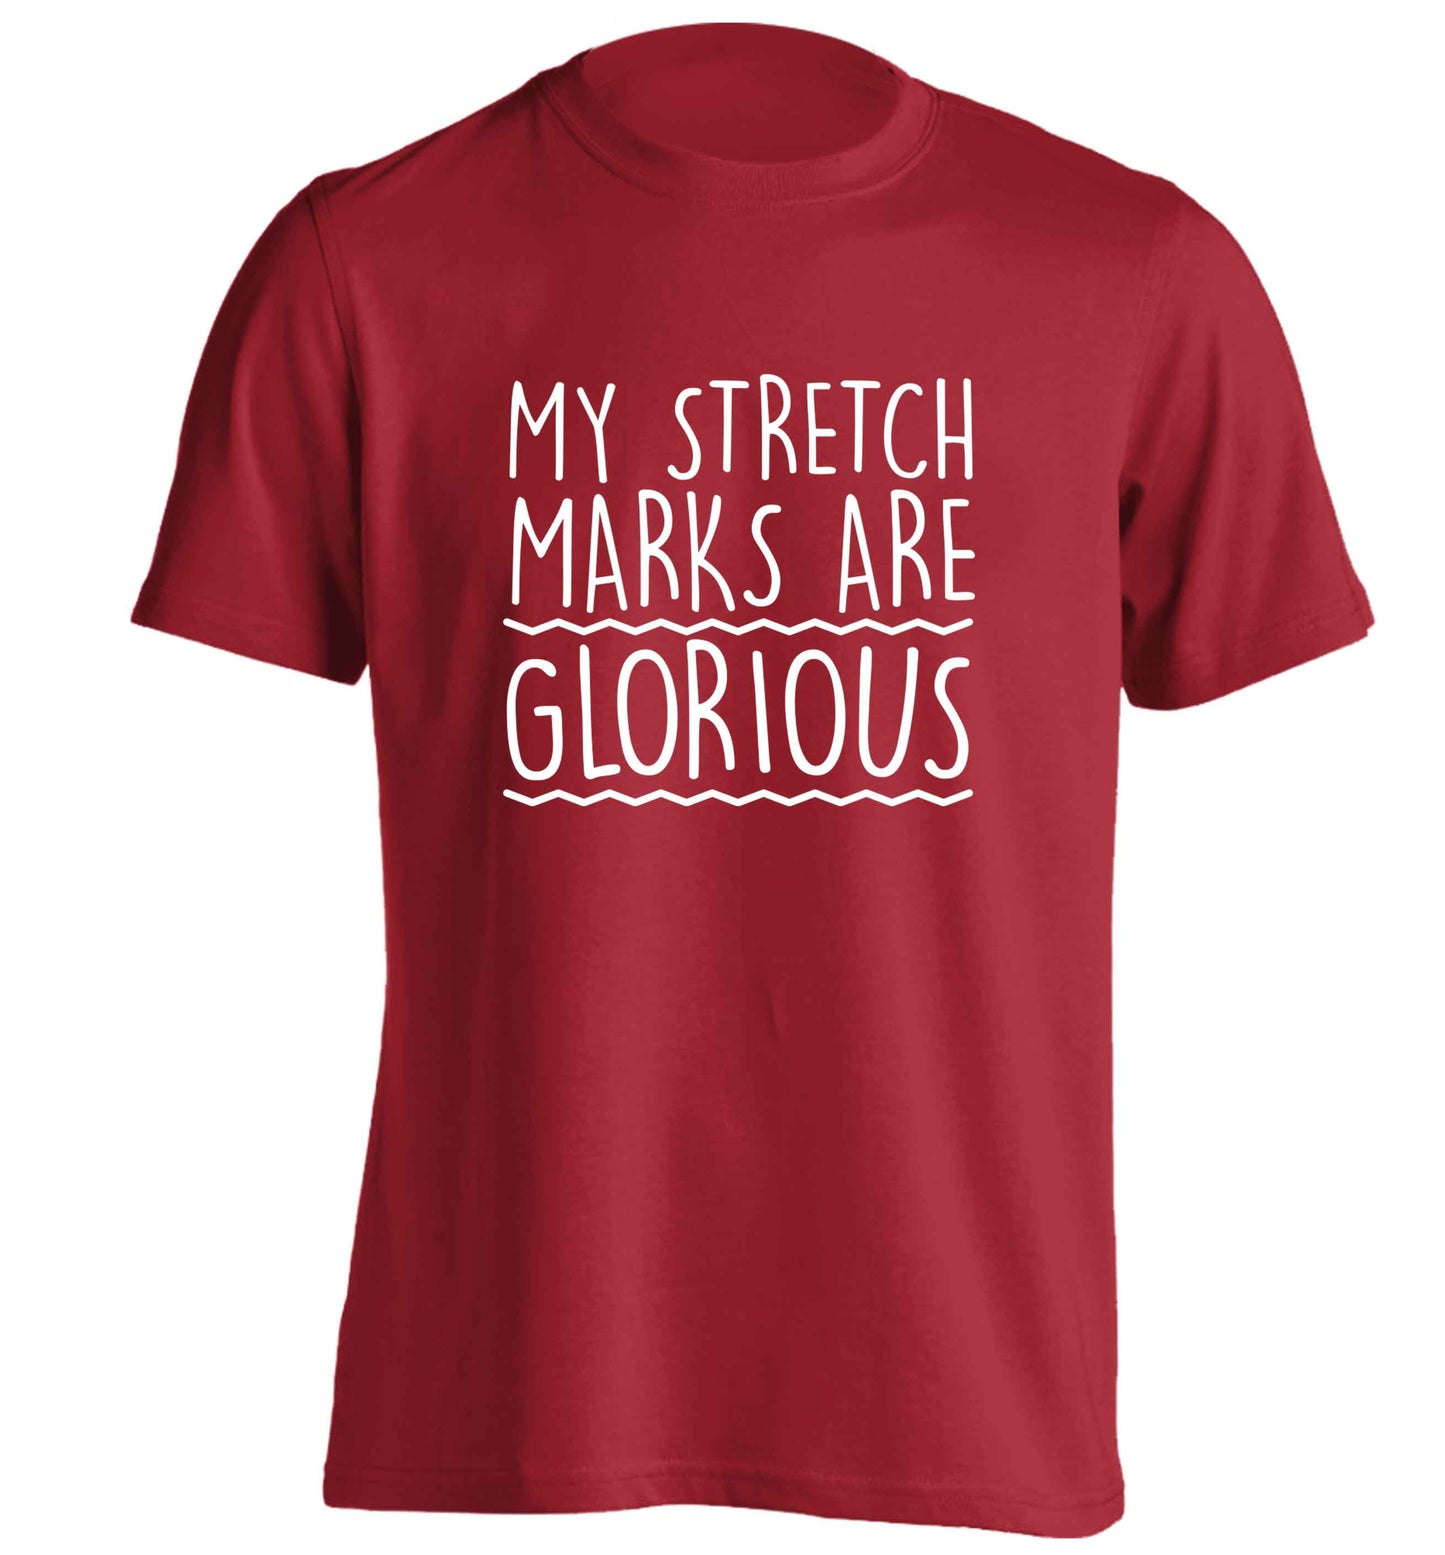 My stretch marks are glorious adults unisex red Tshirt 2XL